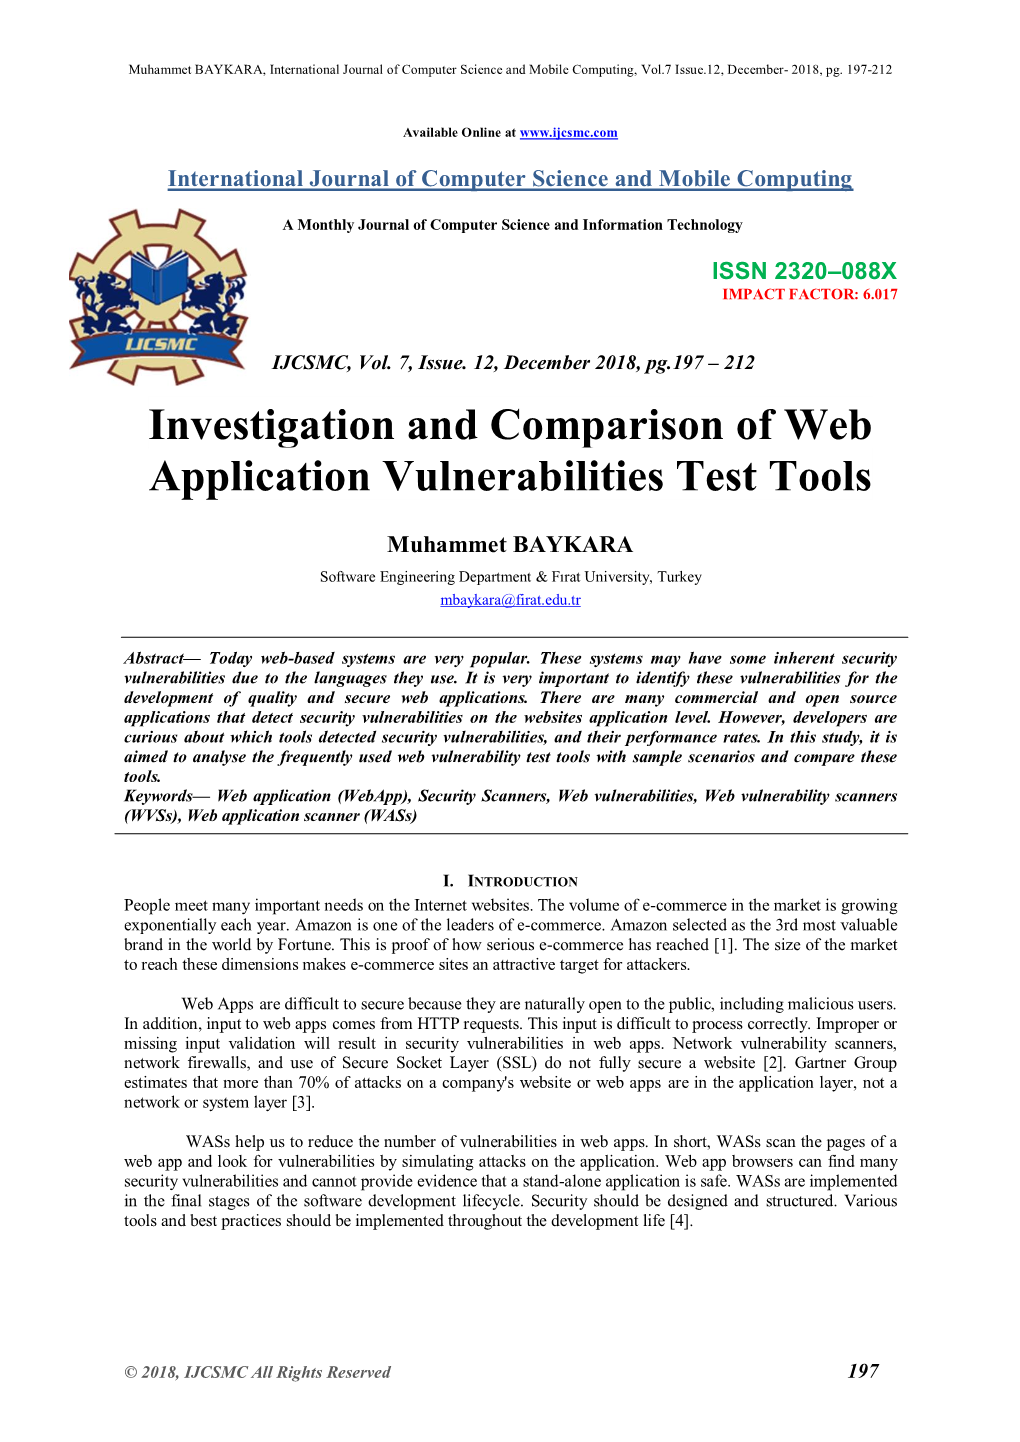 Investigation and Comparison of Web Application Vulnerabilities Test Tools